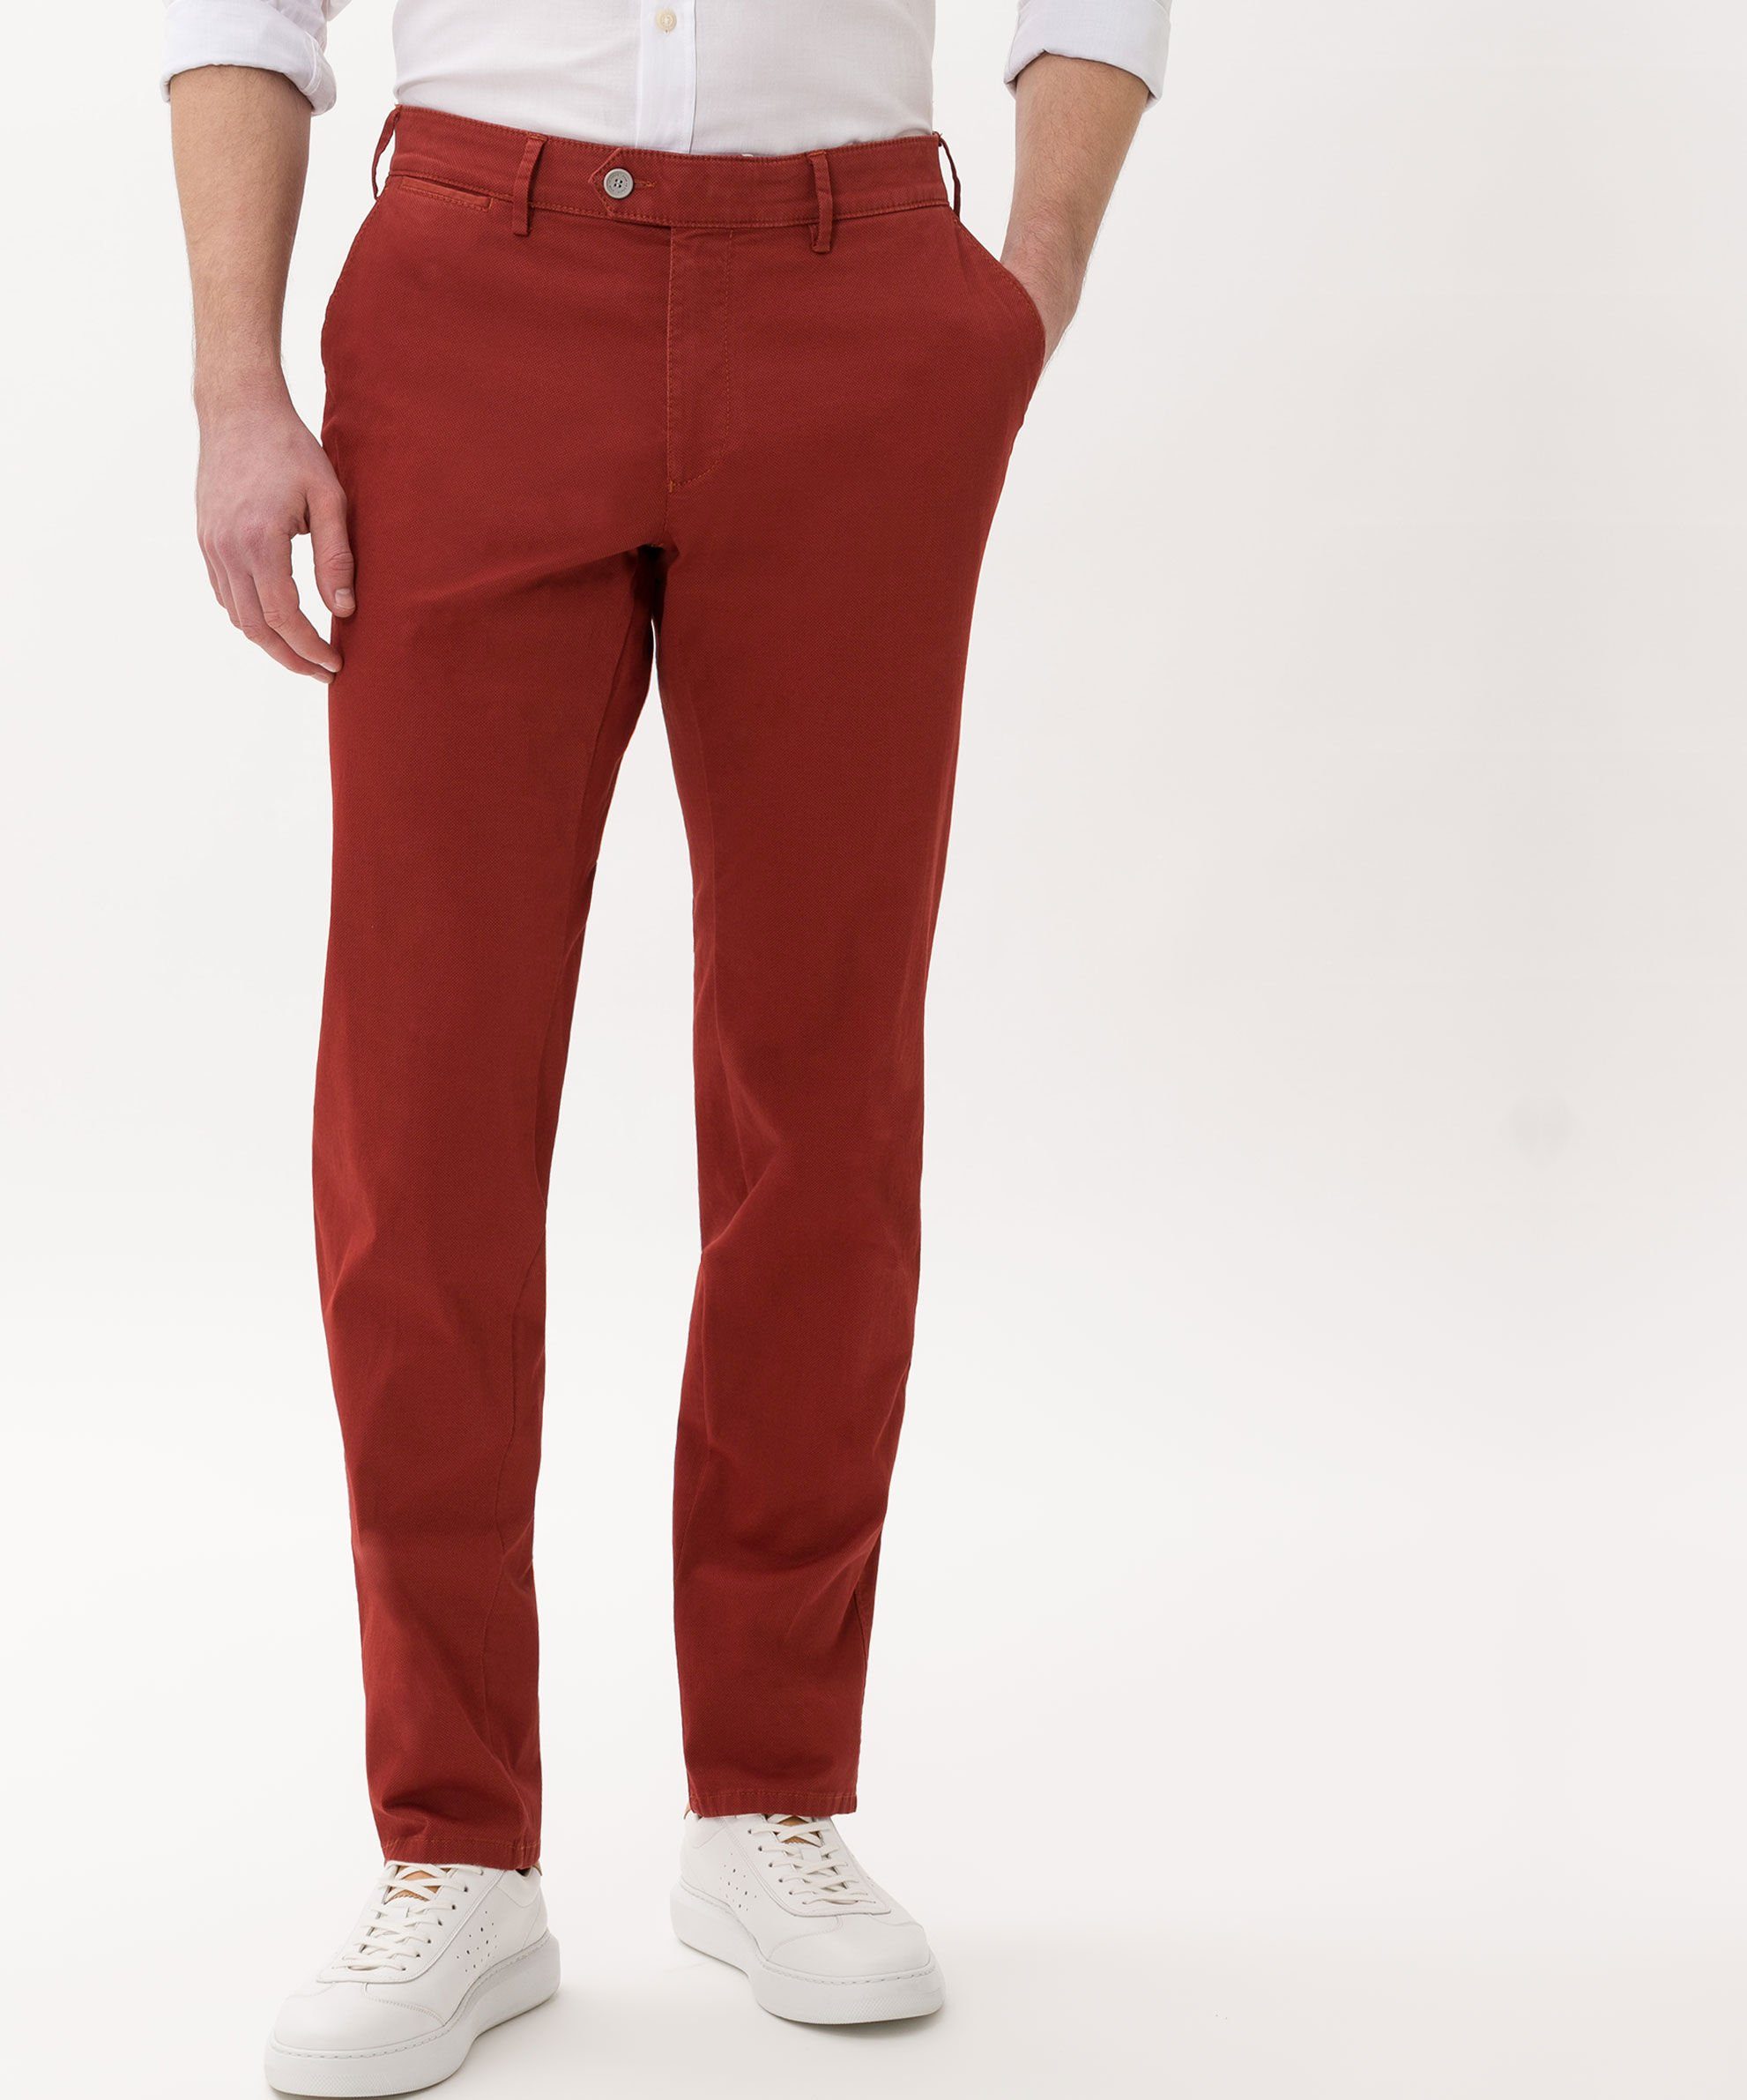 bordeaux Chinohose BRAX EUREX by